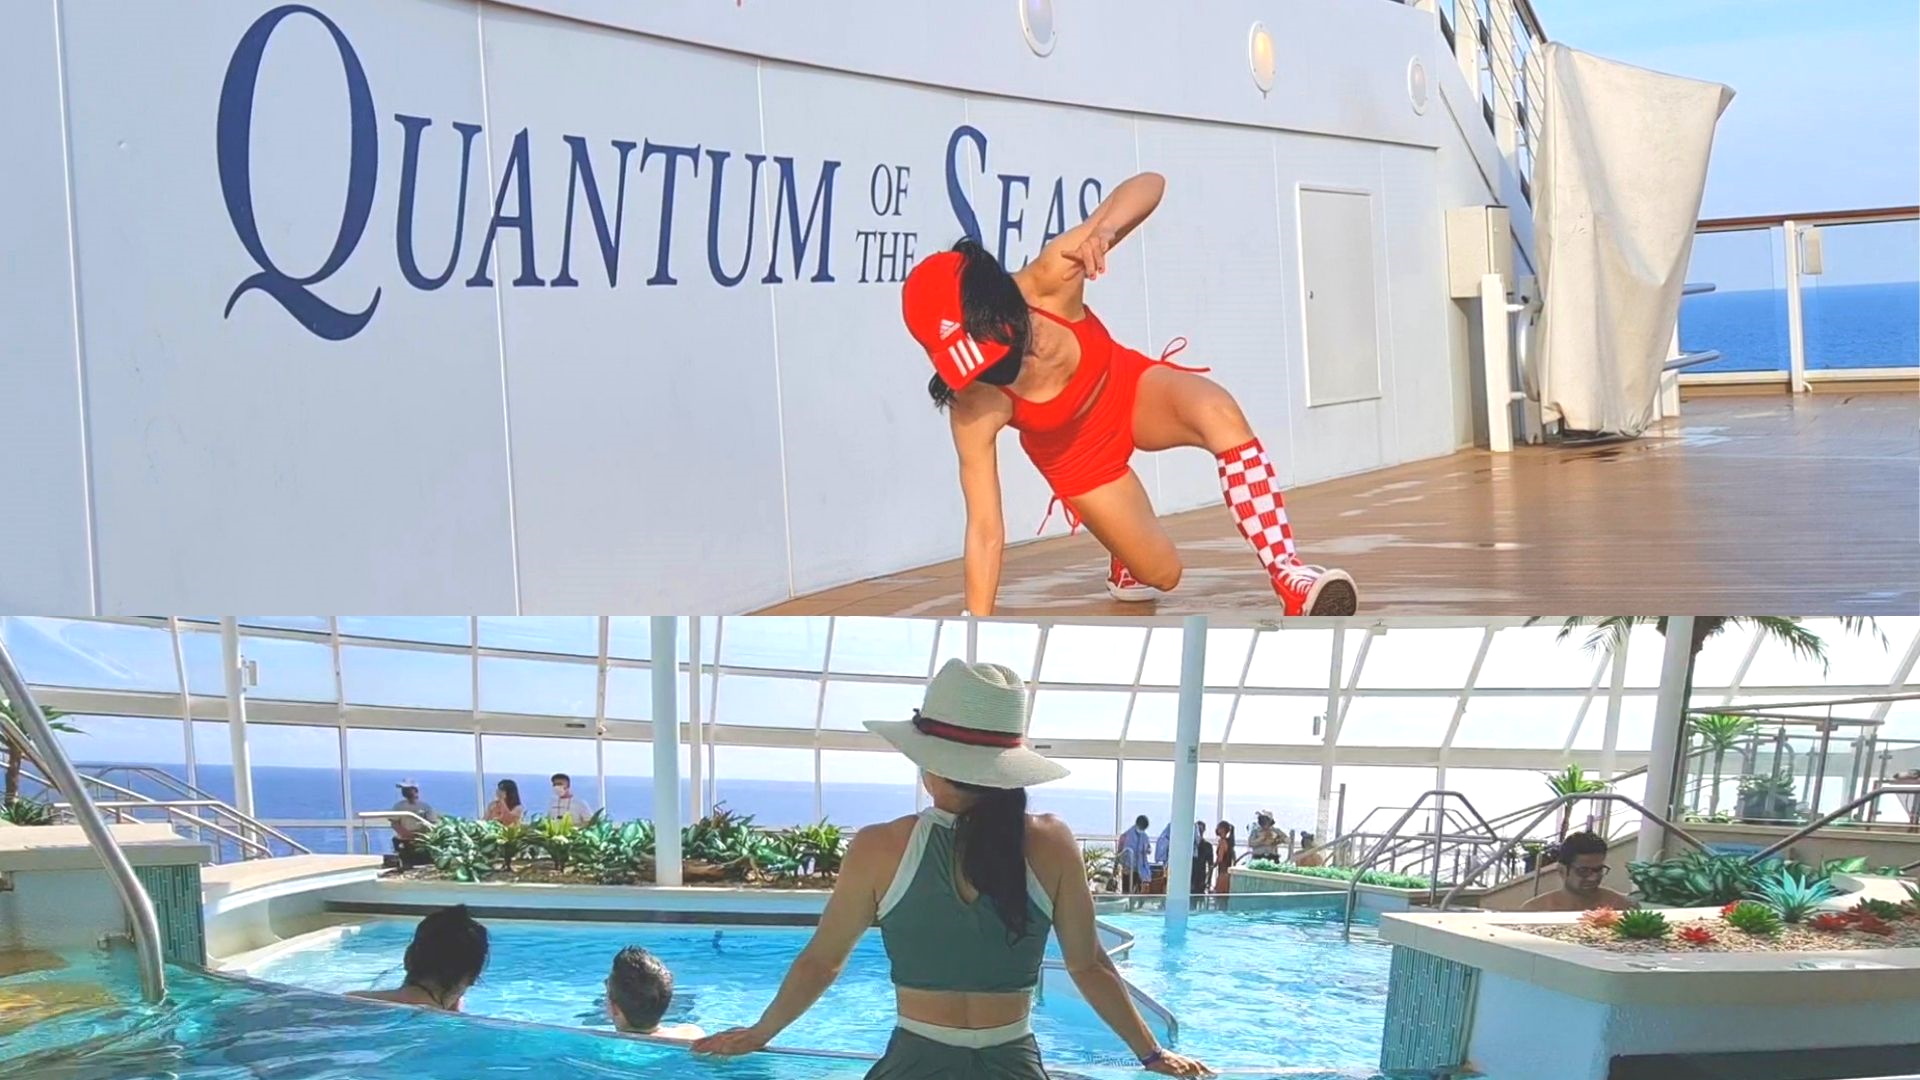 Quantum of the Seas Guests Experiences Long Queues at Testing Site